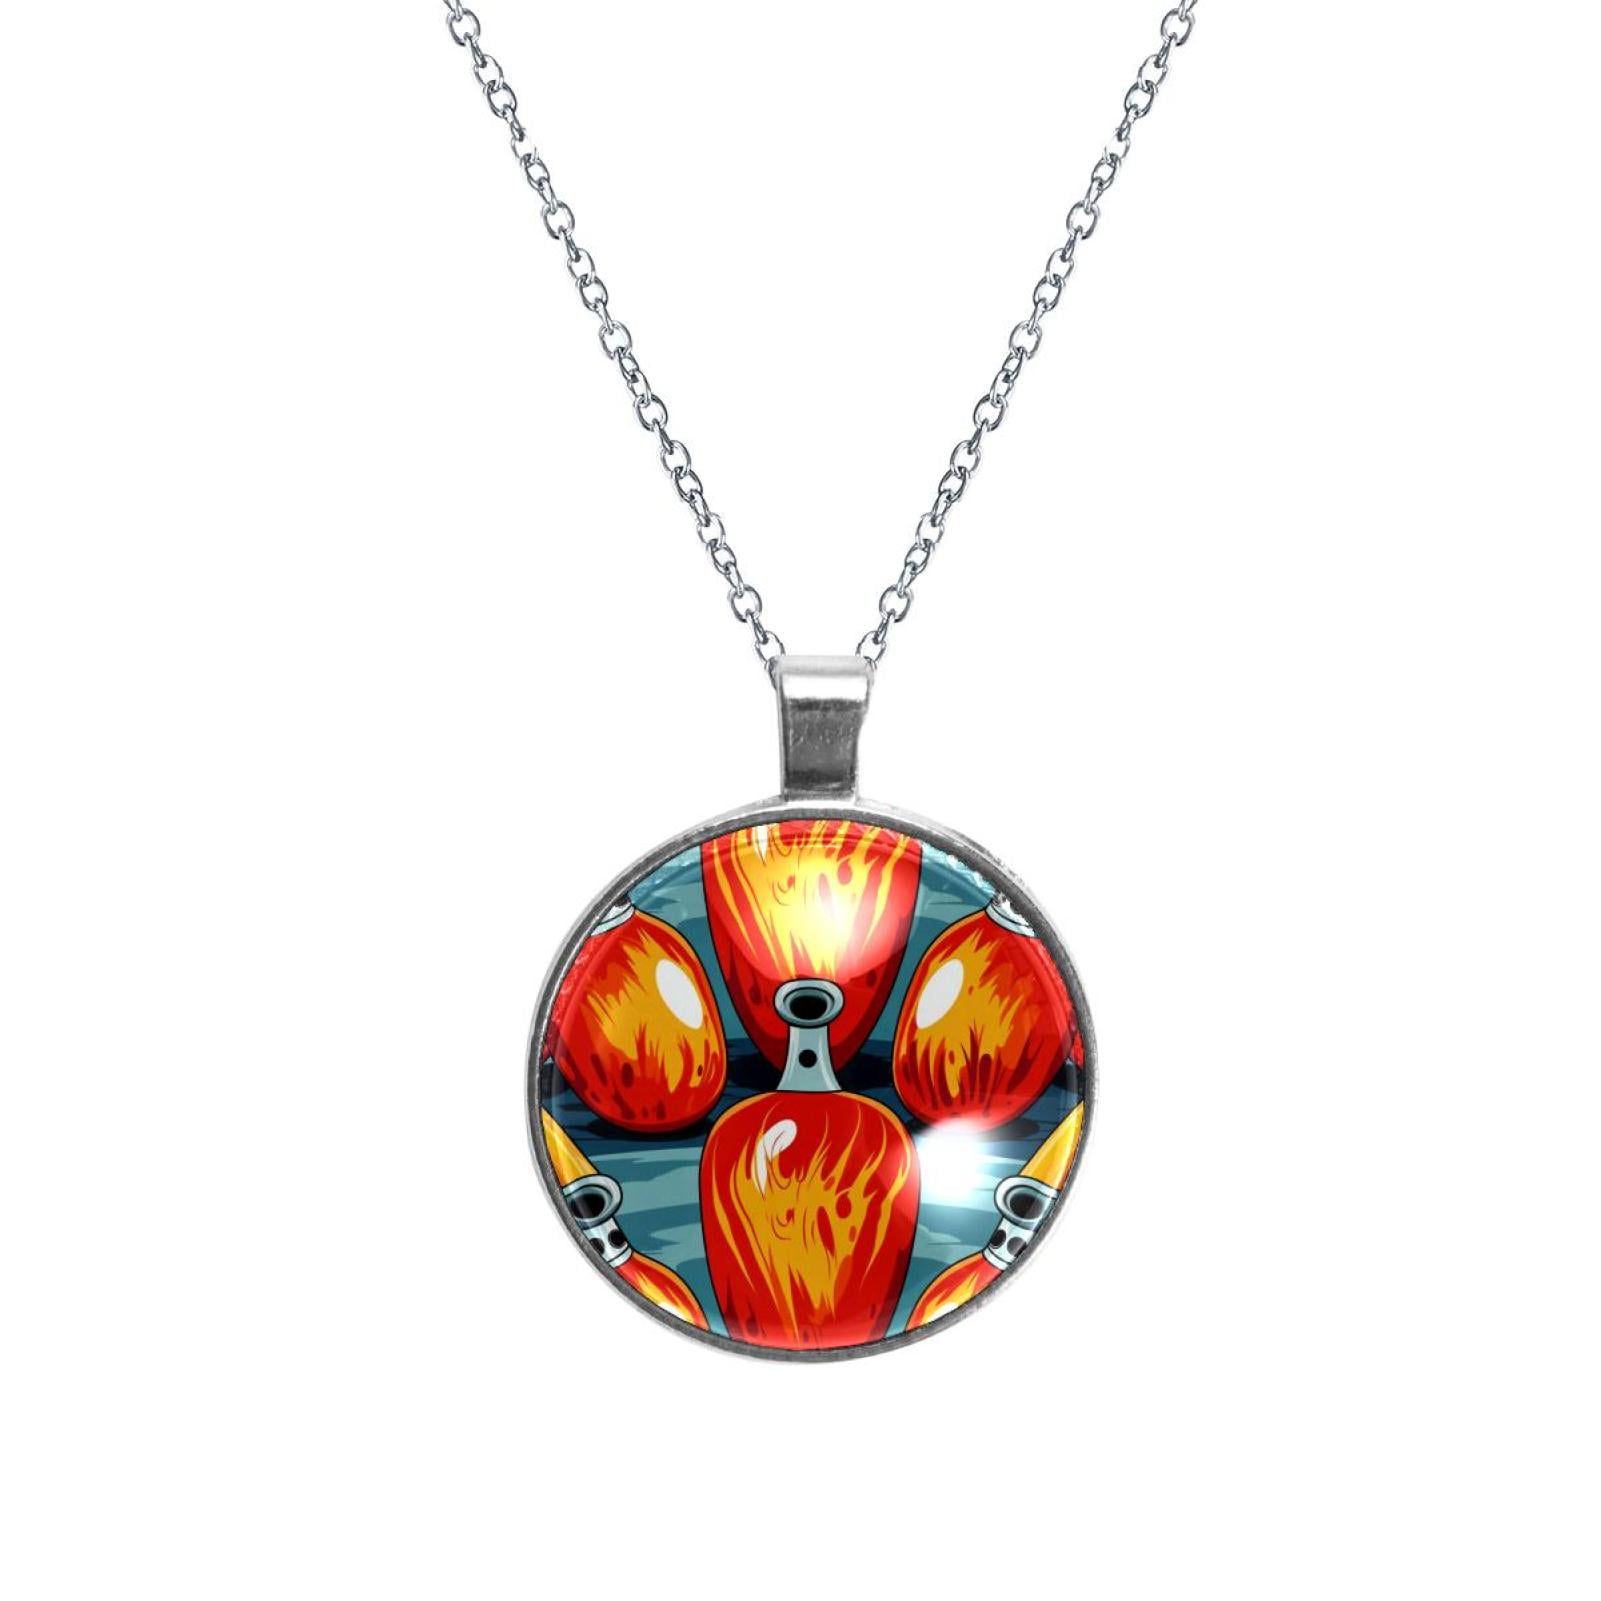 Bowling Stunning Glass Circular Pendant Necklace - Women's Necklaces ...